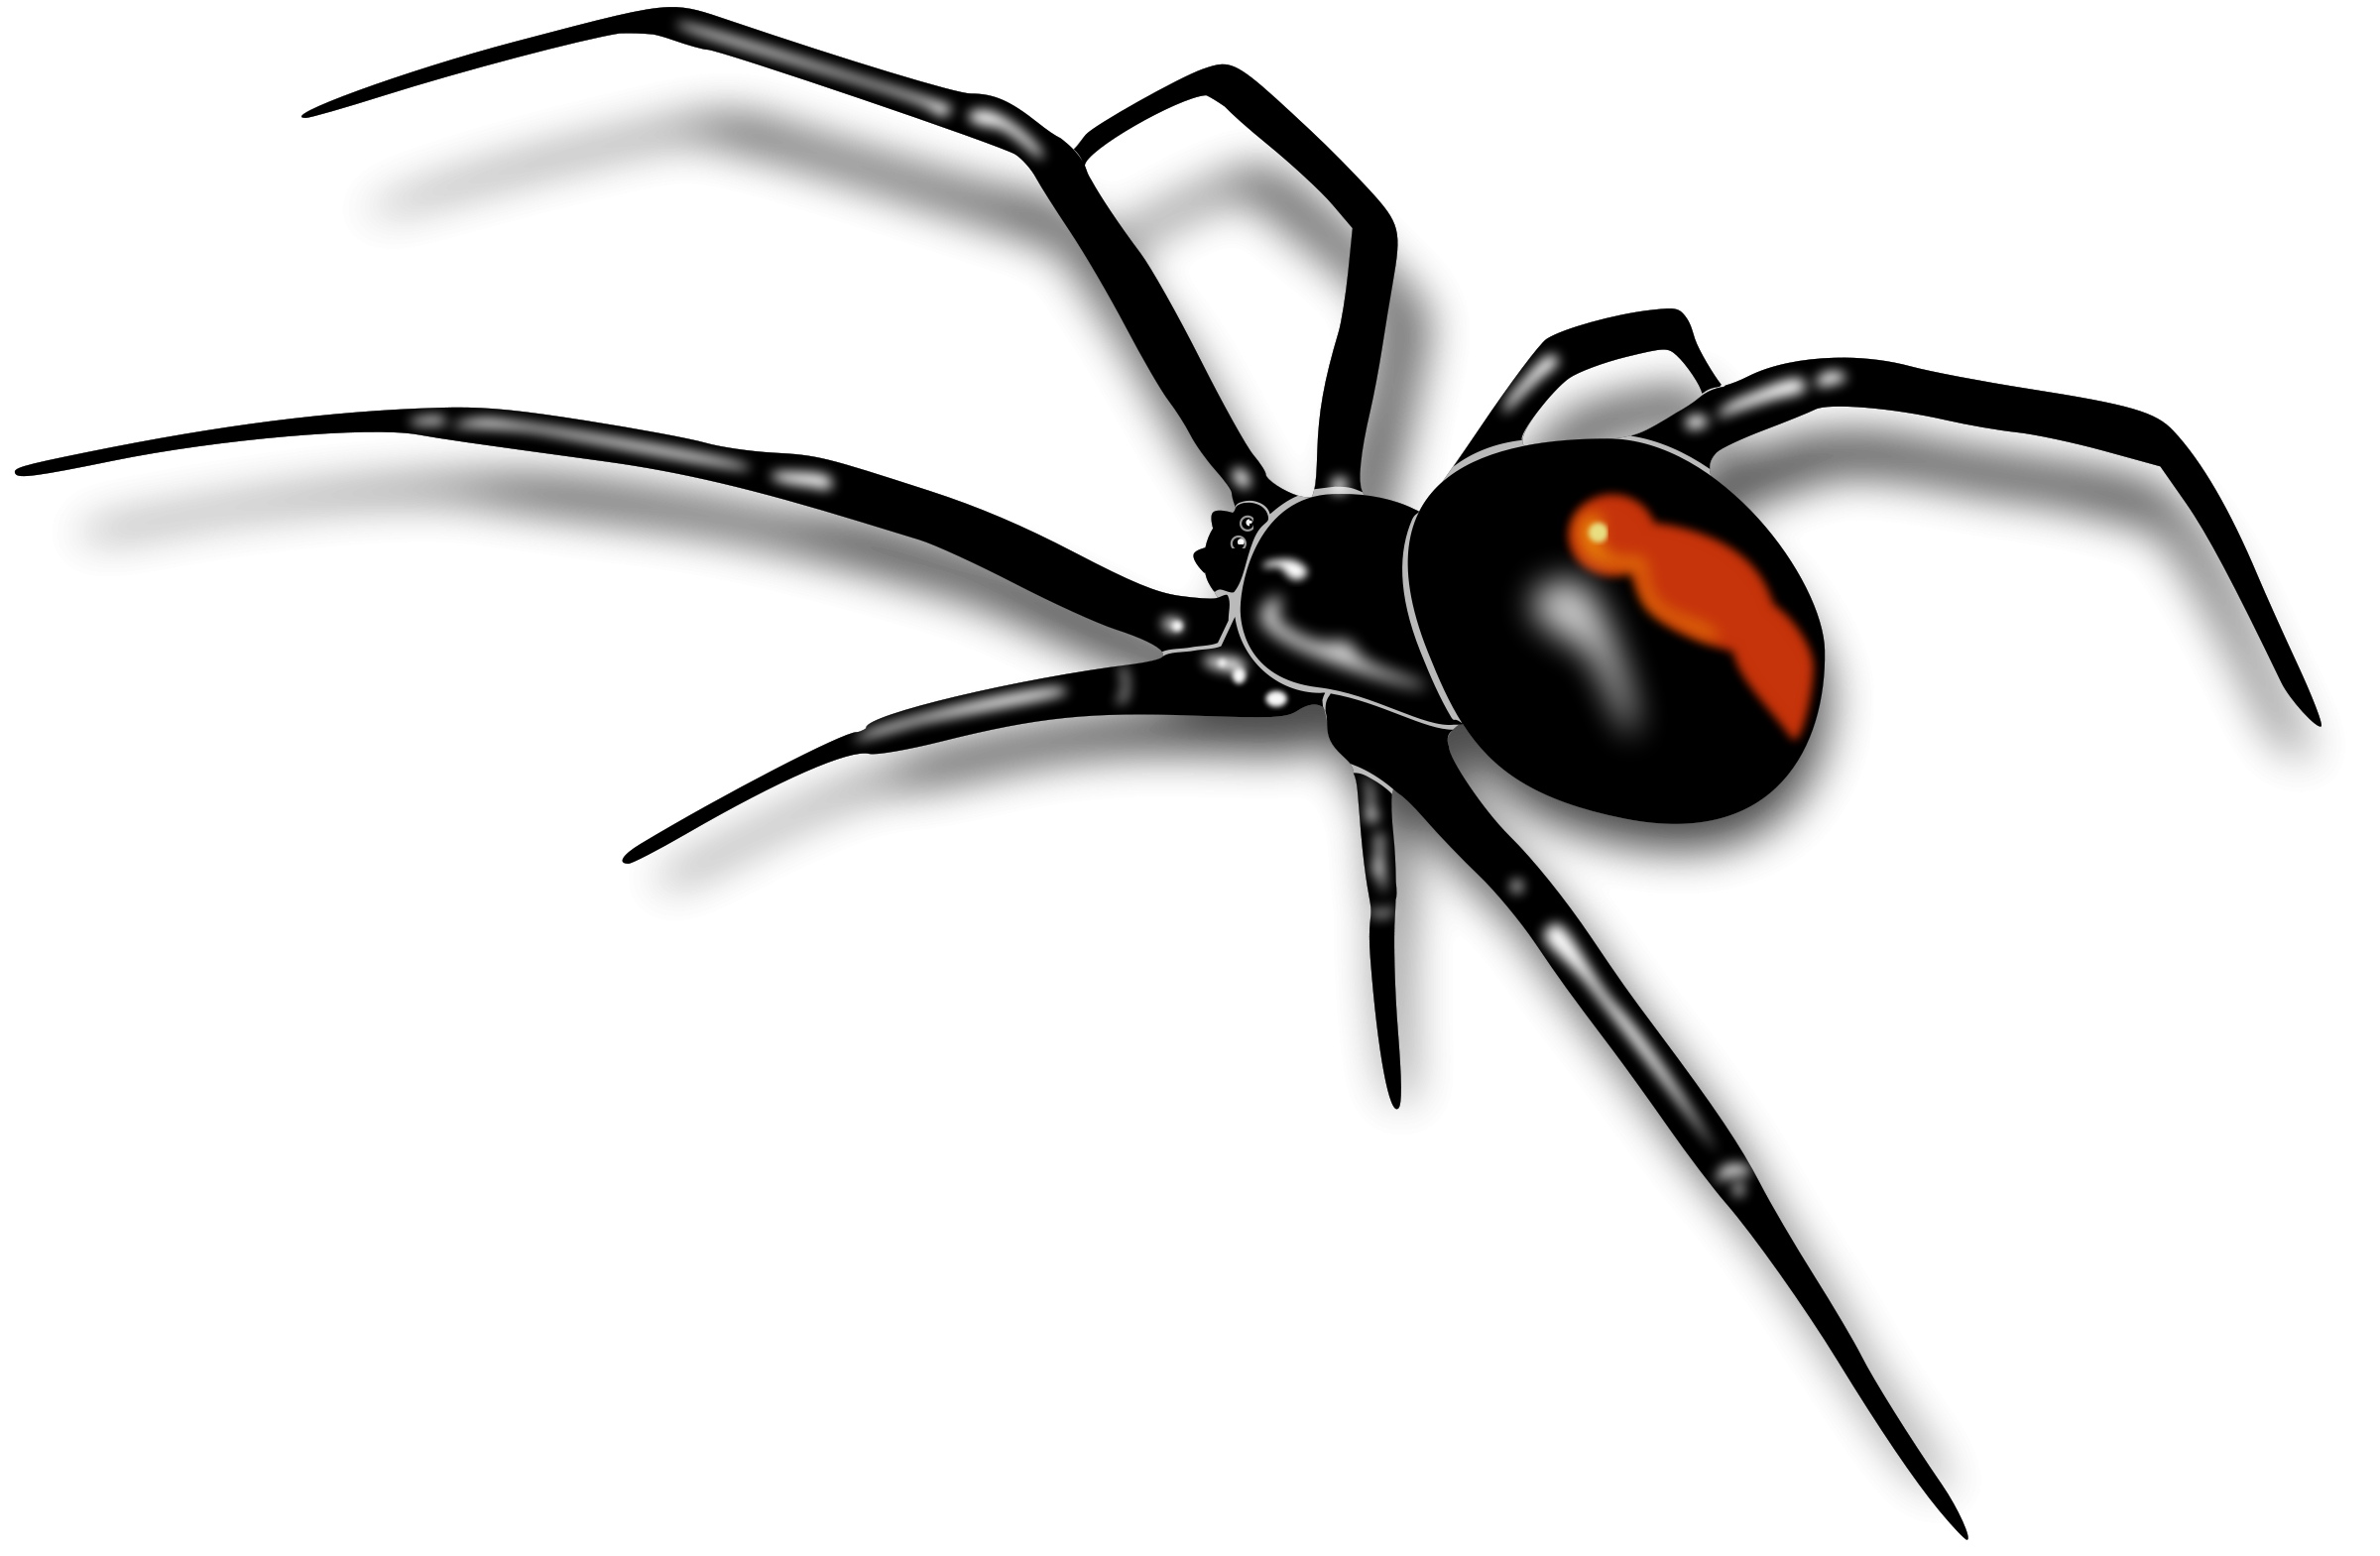 Black Widow Spider PNG File